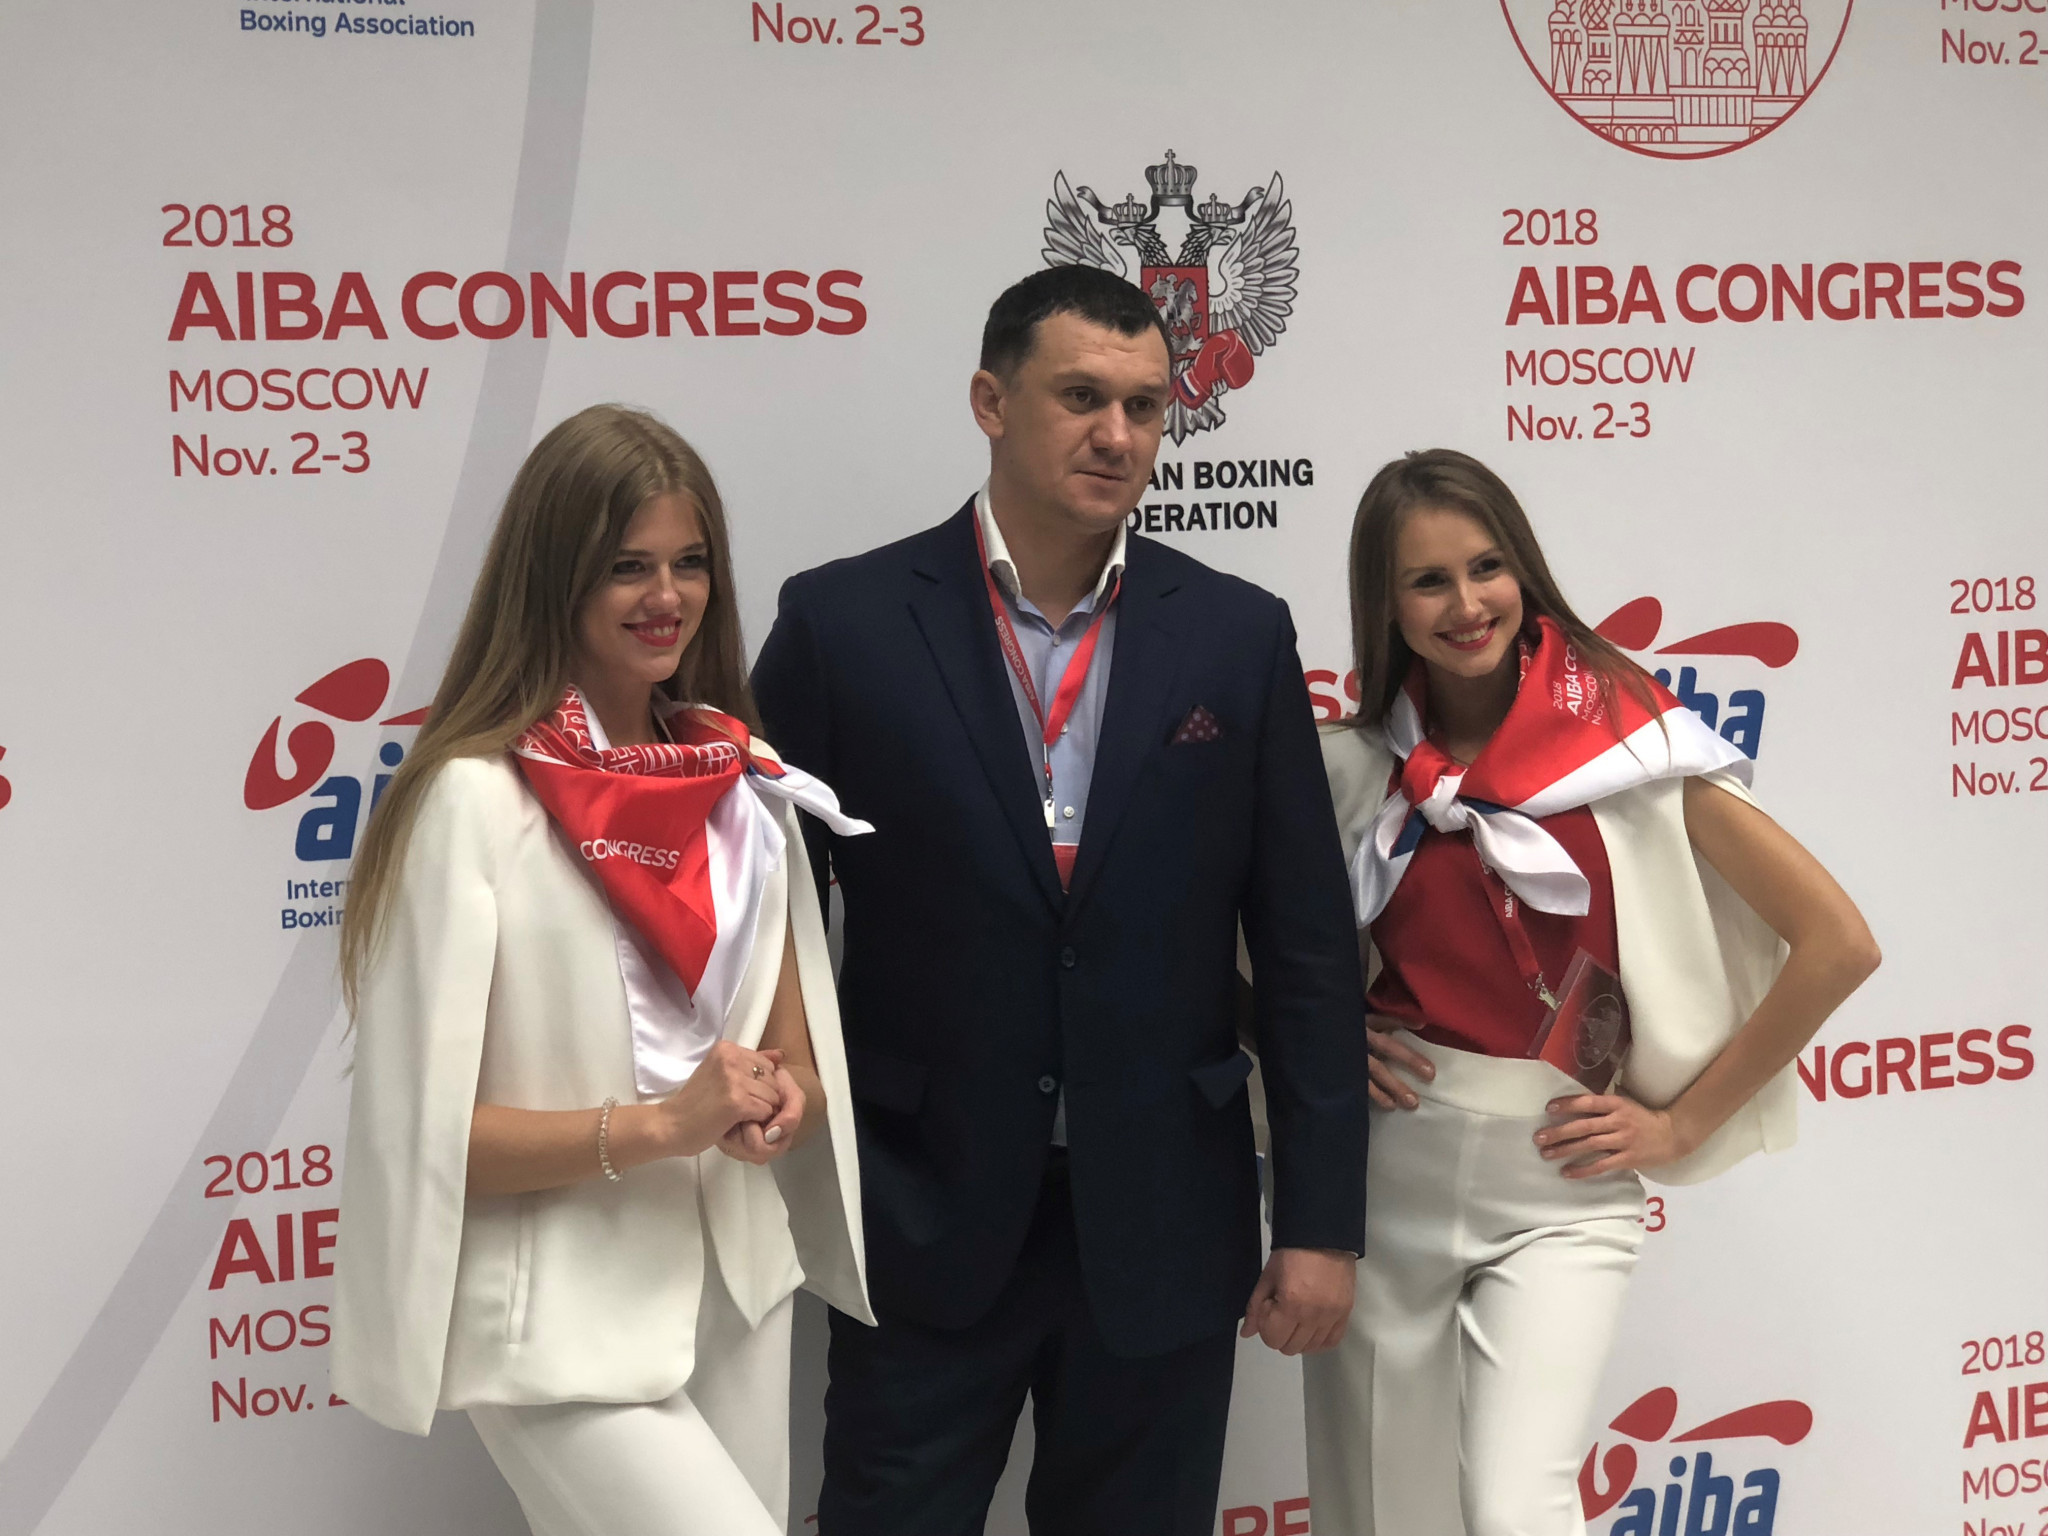 Delegates posed with staff working at the AIBA Congress to have their pictures taken ©ITG